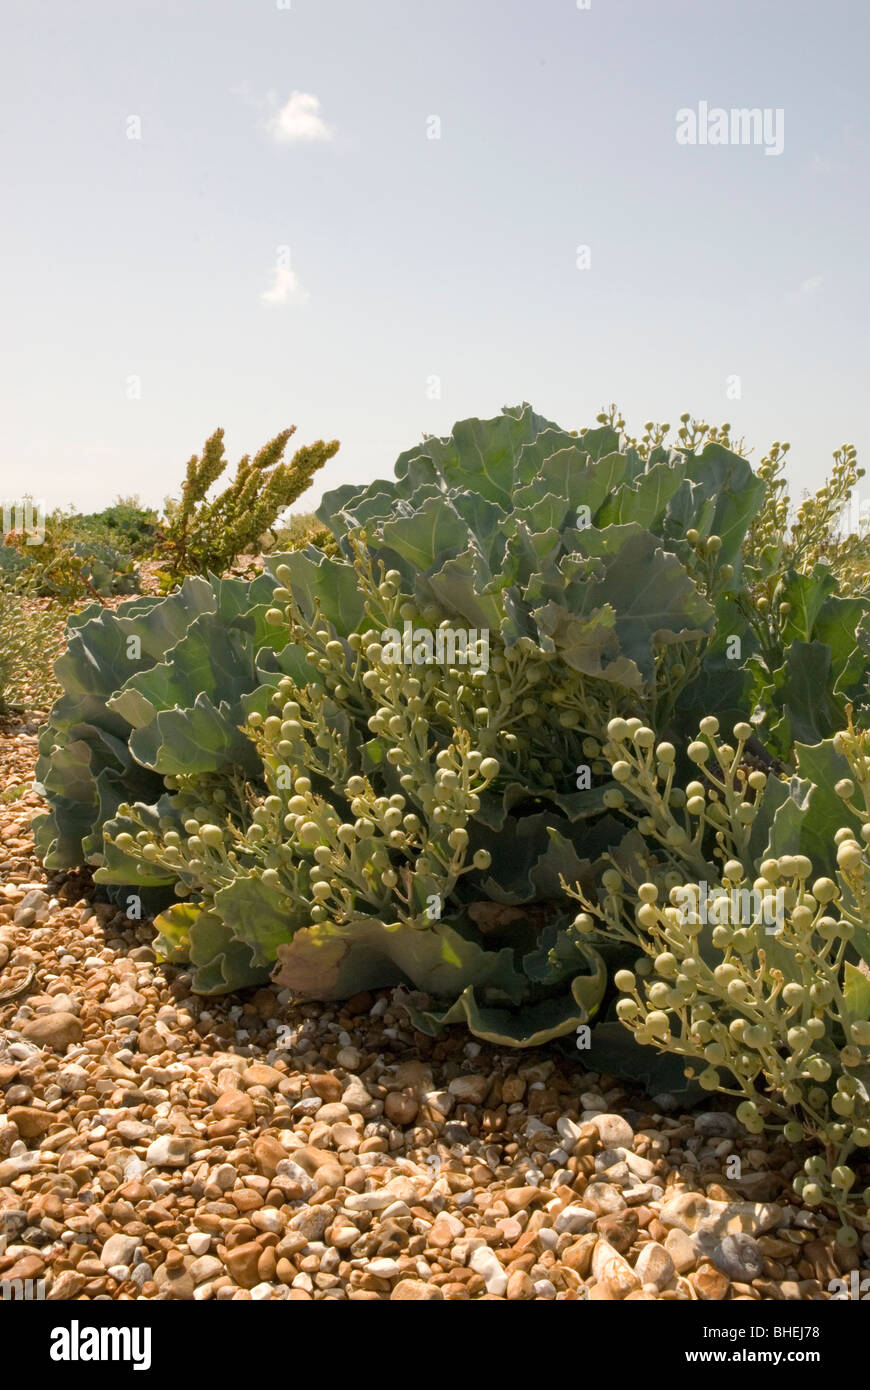 Portrait image of sea kale on a pebble beach at Dungeness, Kent, taken on a sunny day. Stock Photo